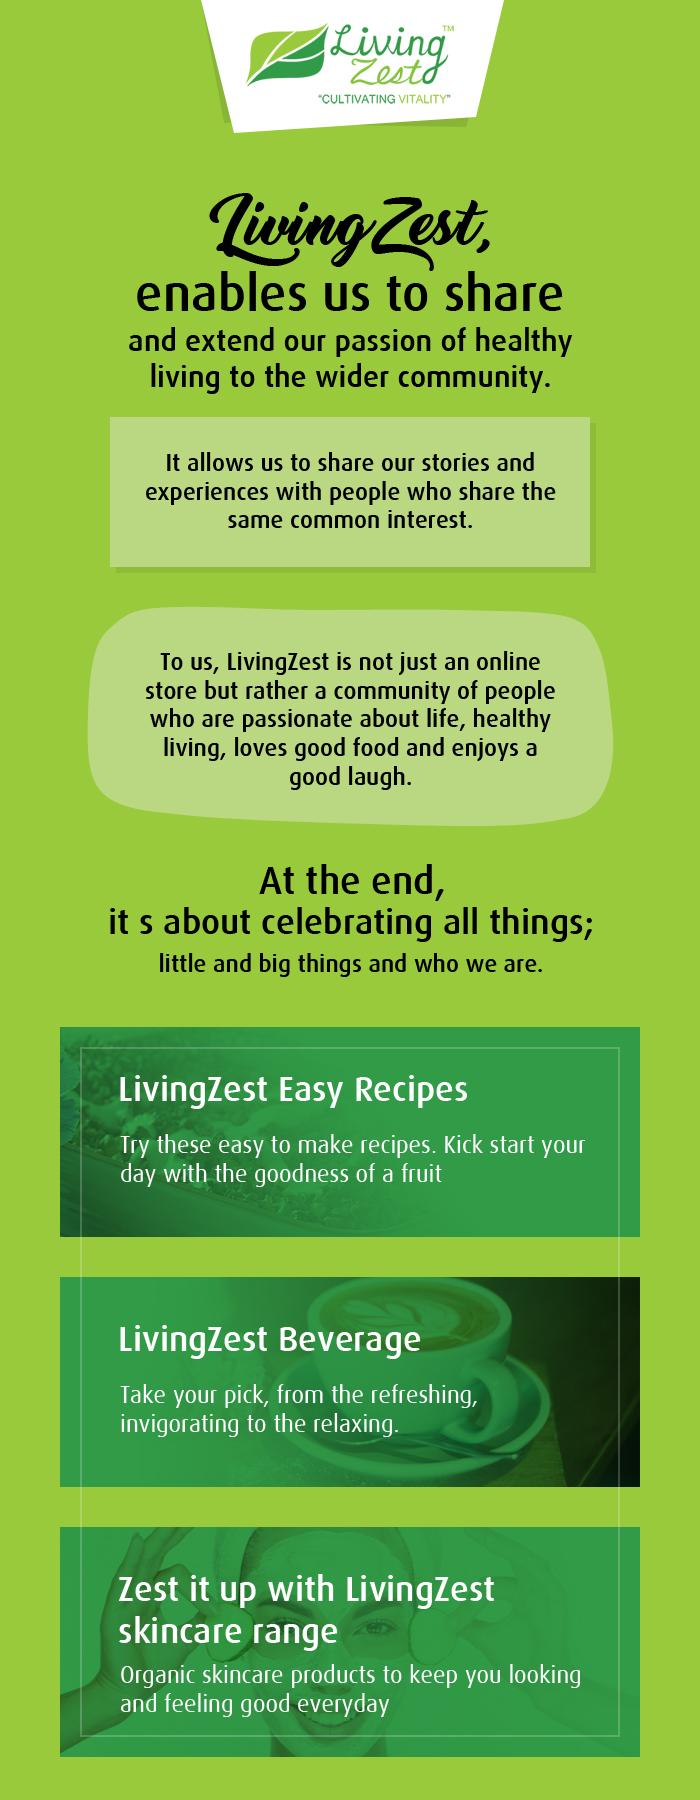 Buy 100% Natural Beauty Products and Organic Food Items from LivingZest